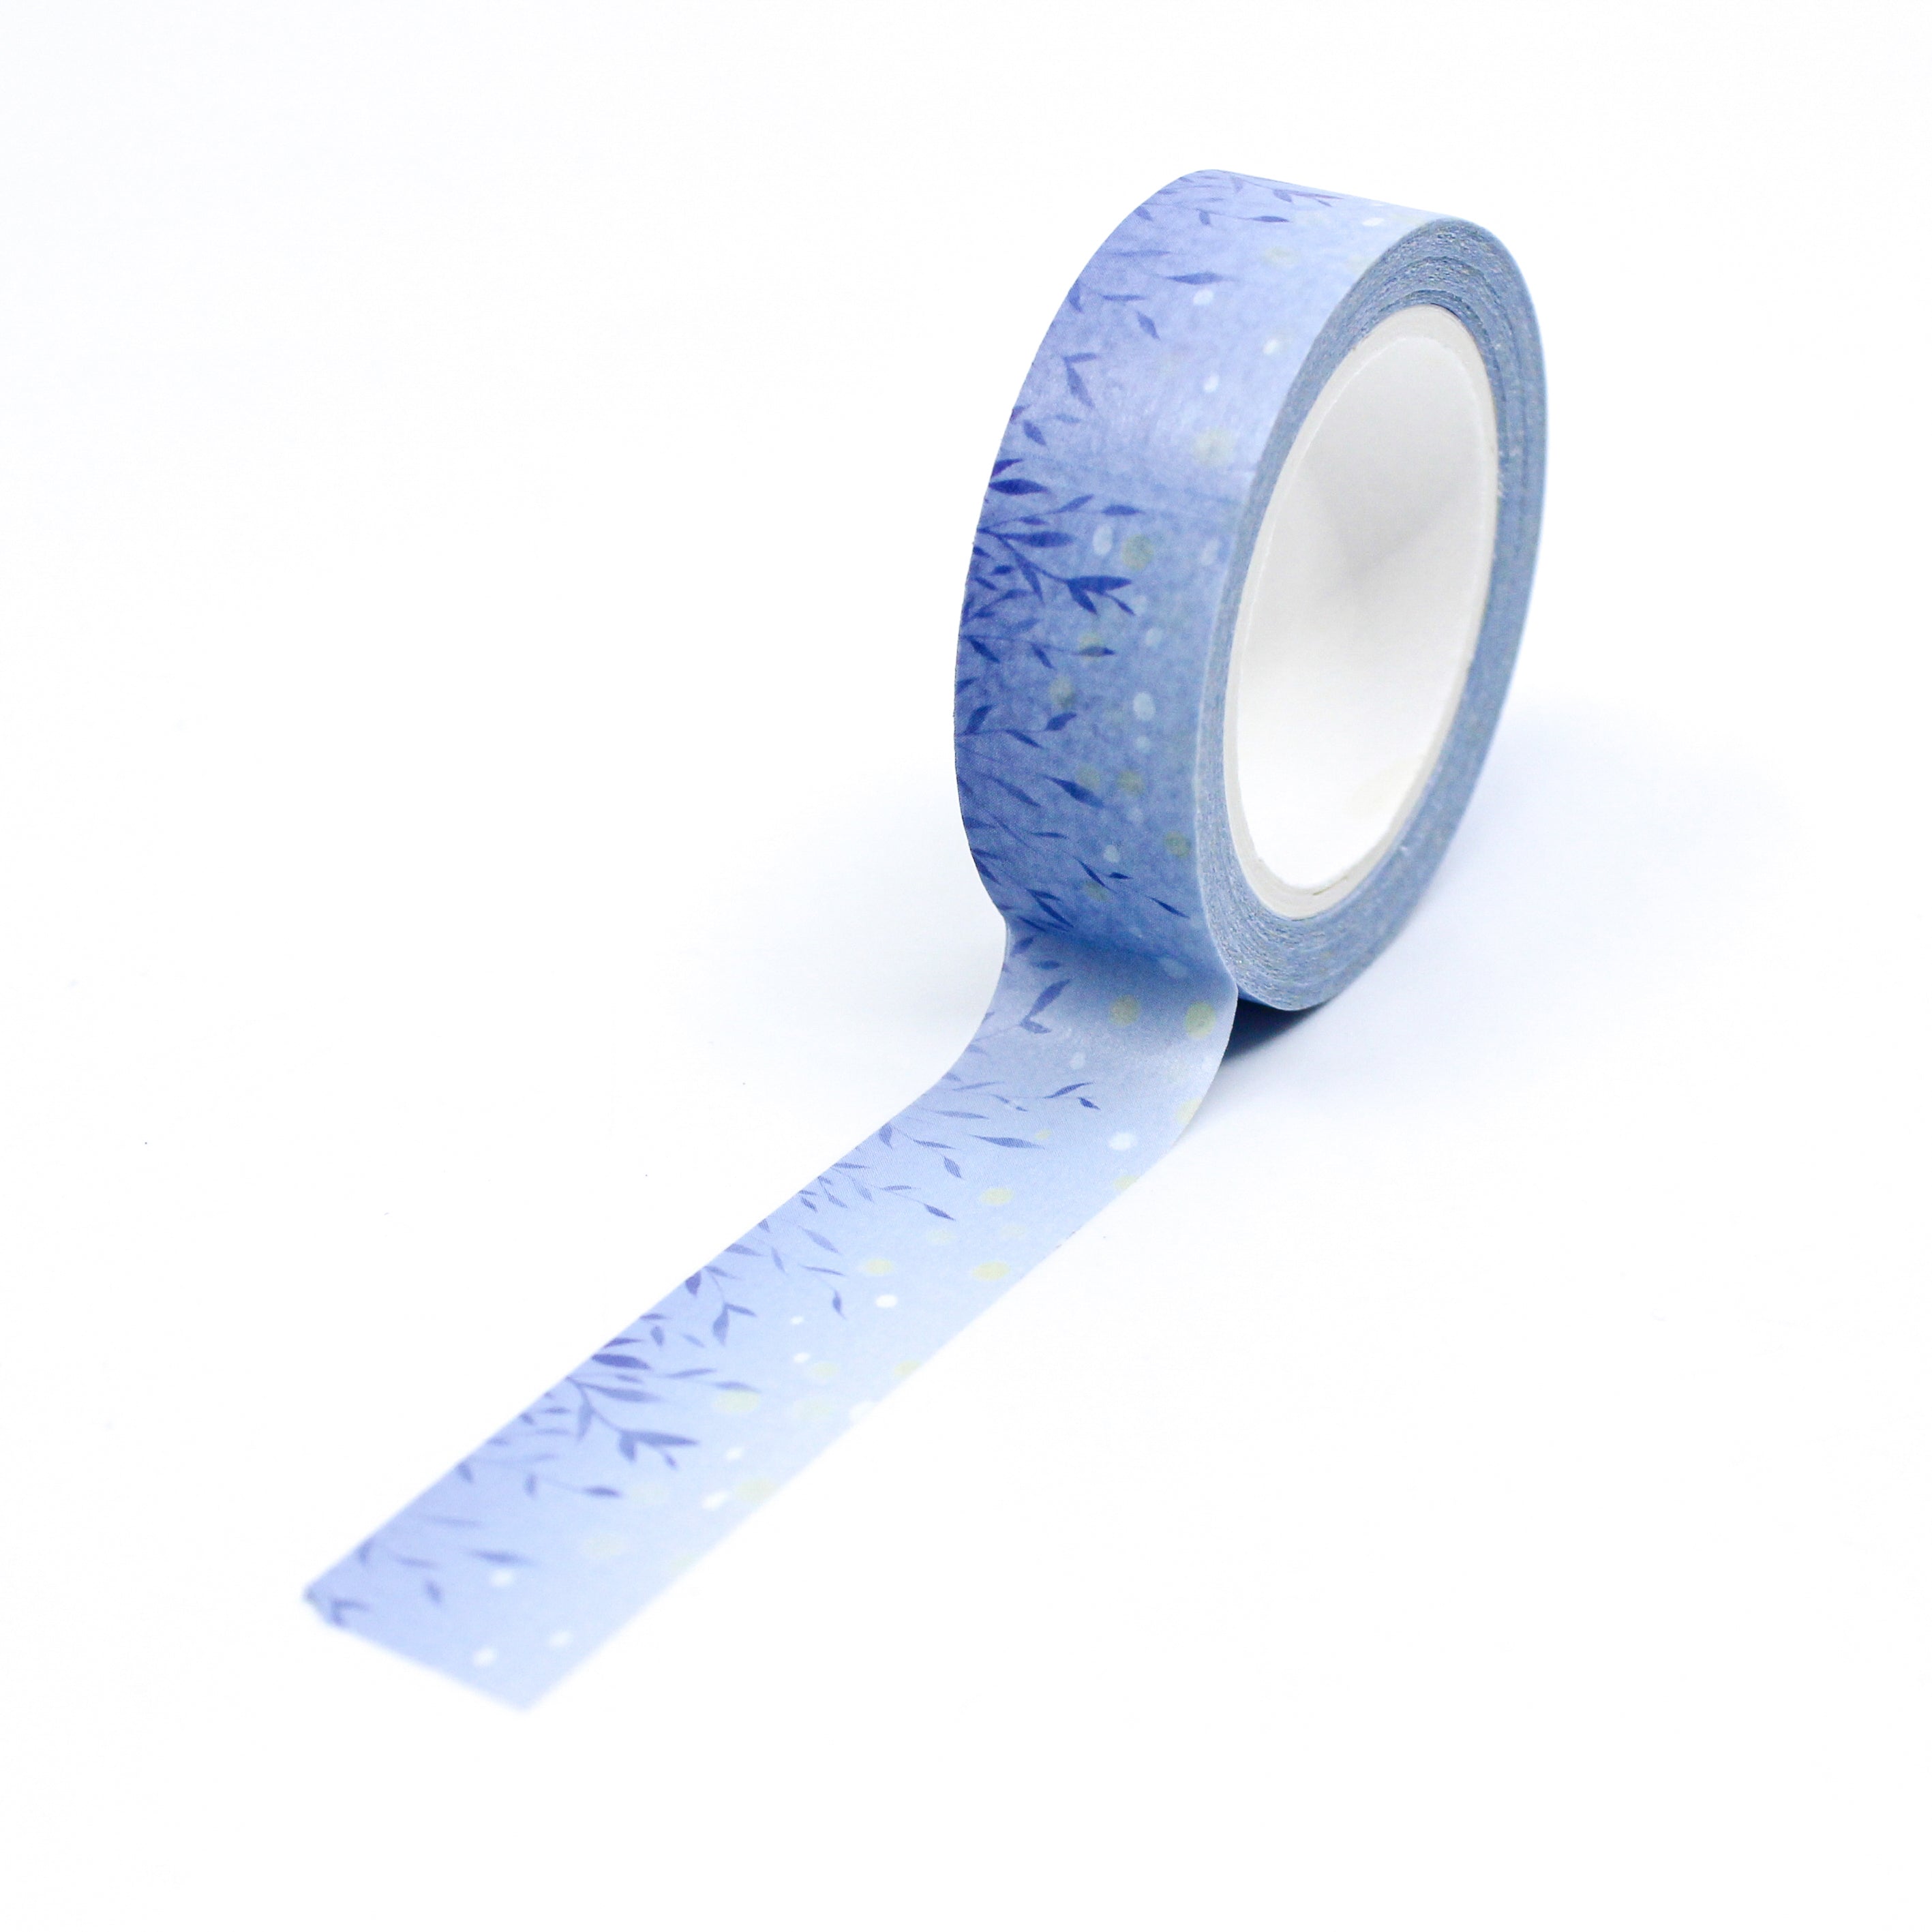 This a full pattern repeat view of blue field scenery pattern washi tape from BBB Supplies Craft Shop